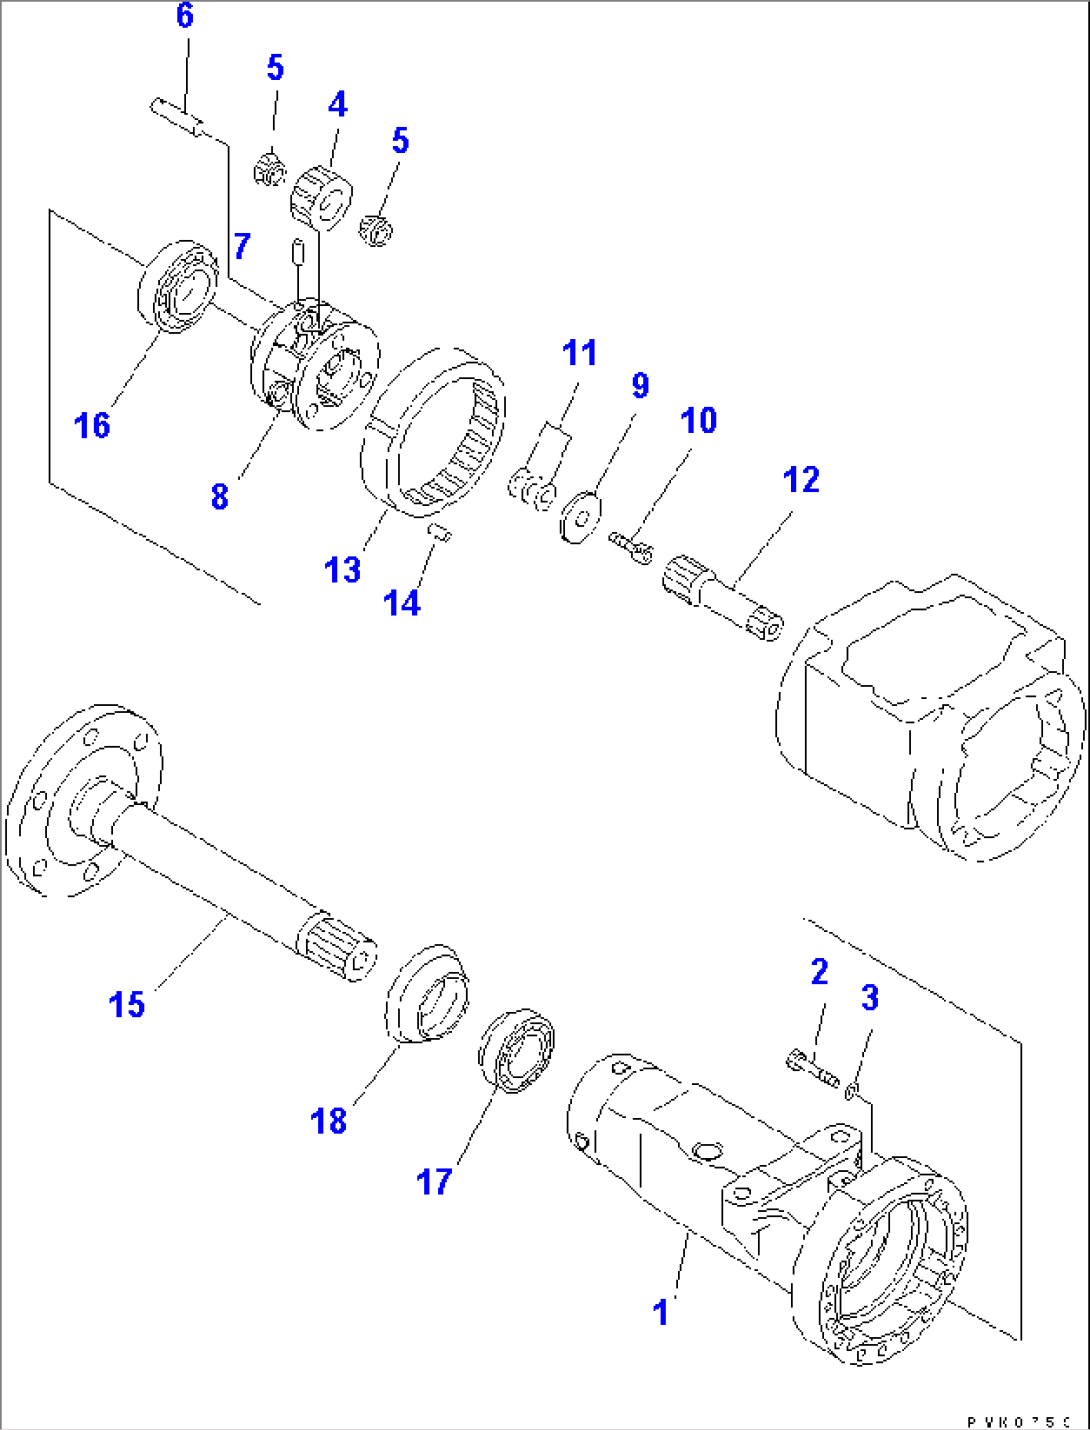 FRONT AXLE (FINAL DRIVE¤ R.H.)